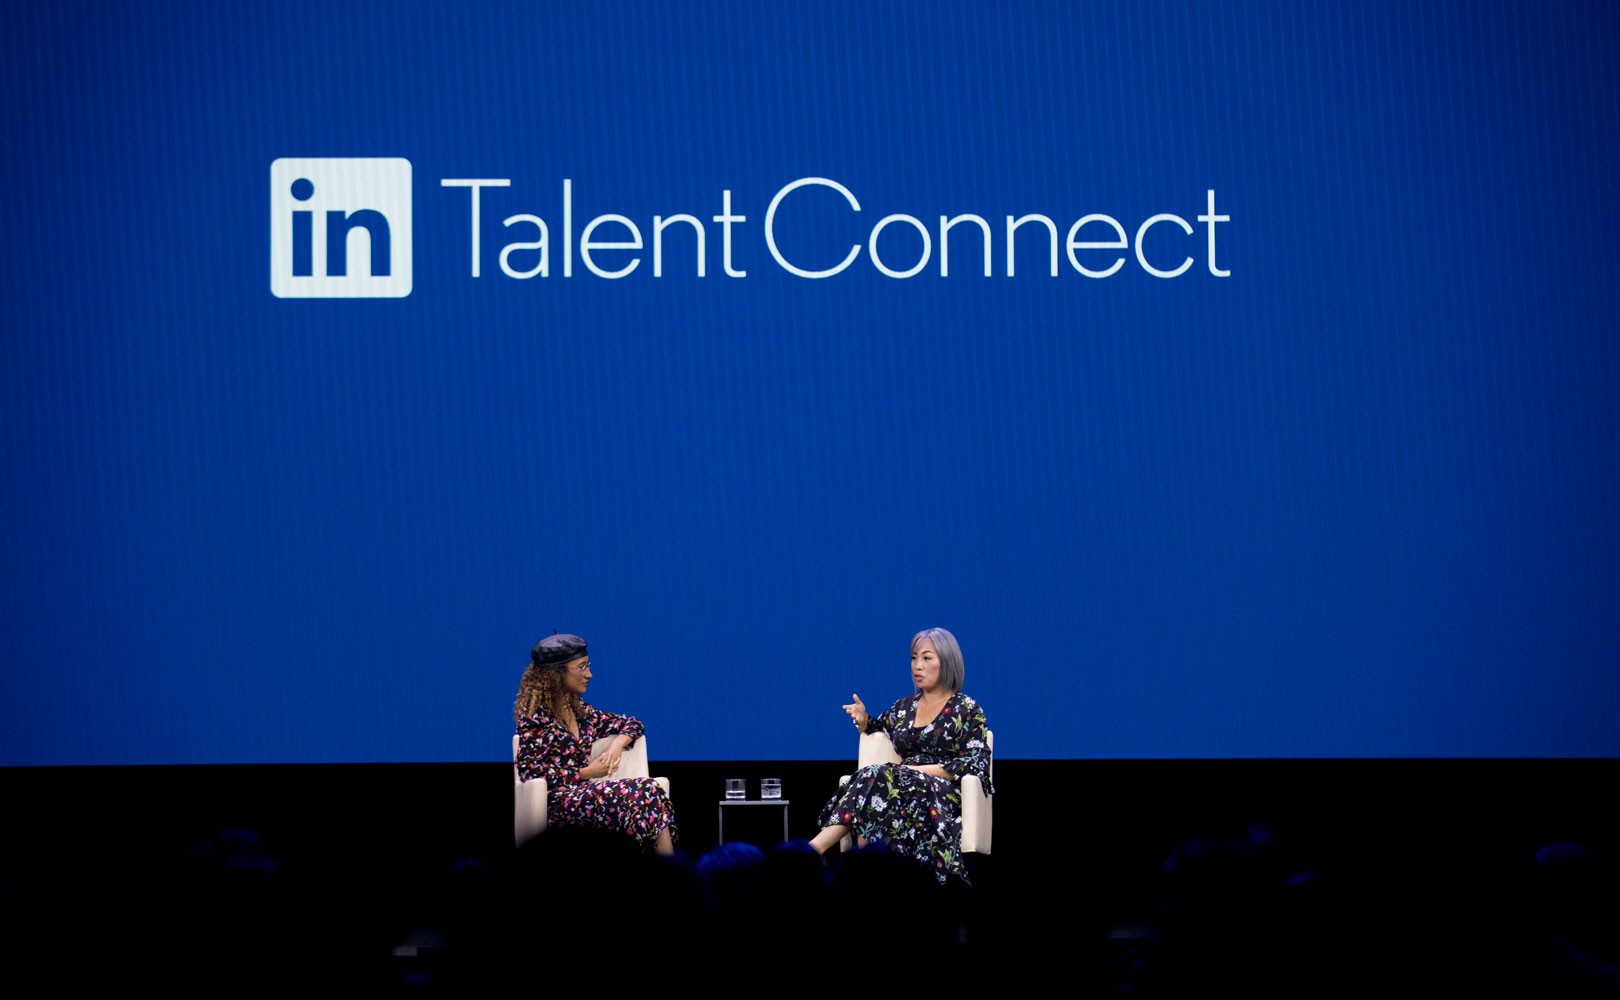 Where to Find All the Talent Connect 2018 Talks, Photos, and More